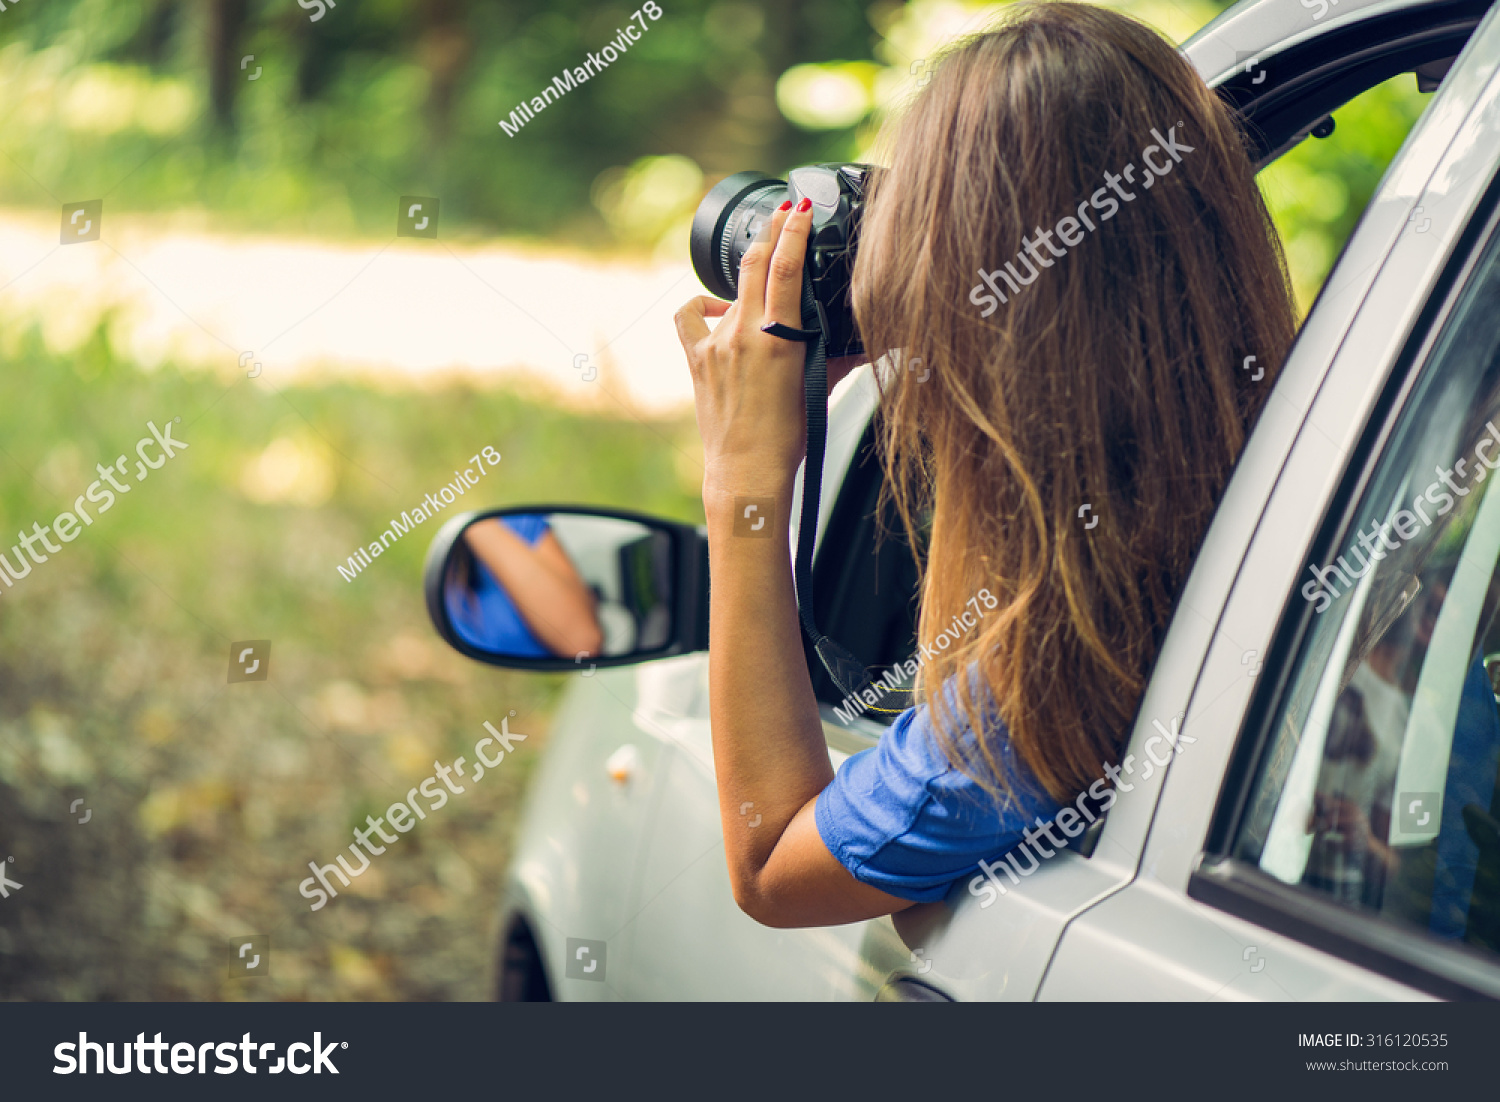 stock-photo-young-beautiful-woman-sitting-in-car-in-the-forest-and-photographing-with-digital-camera-316120535.jpg